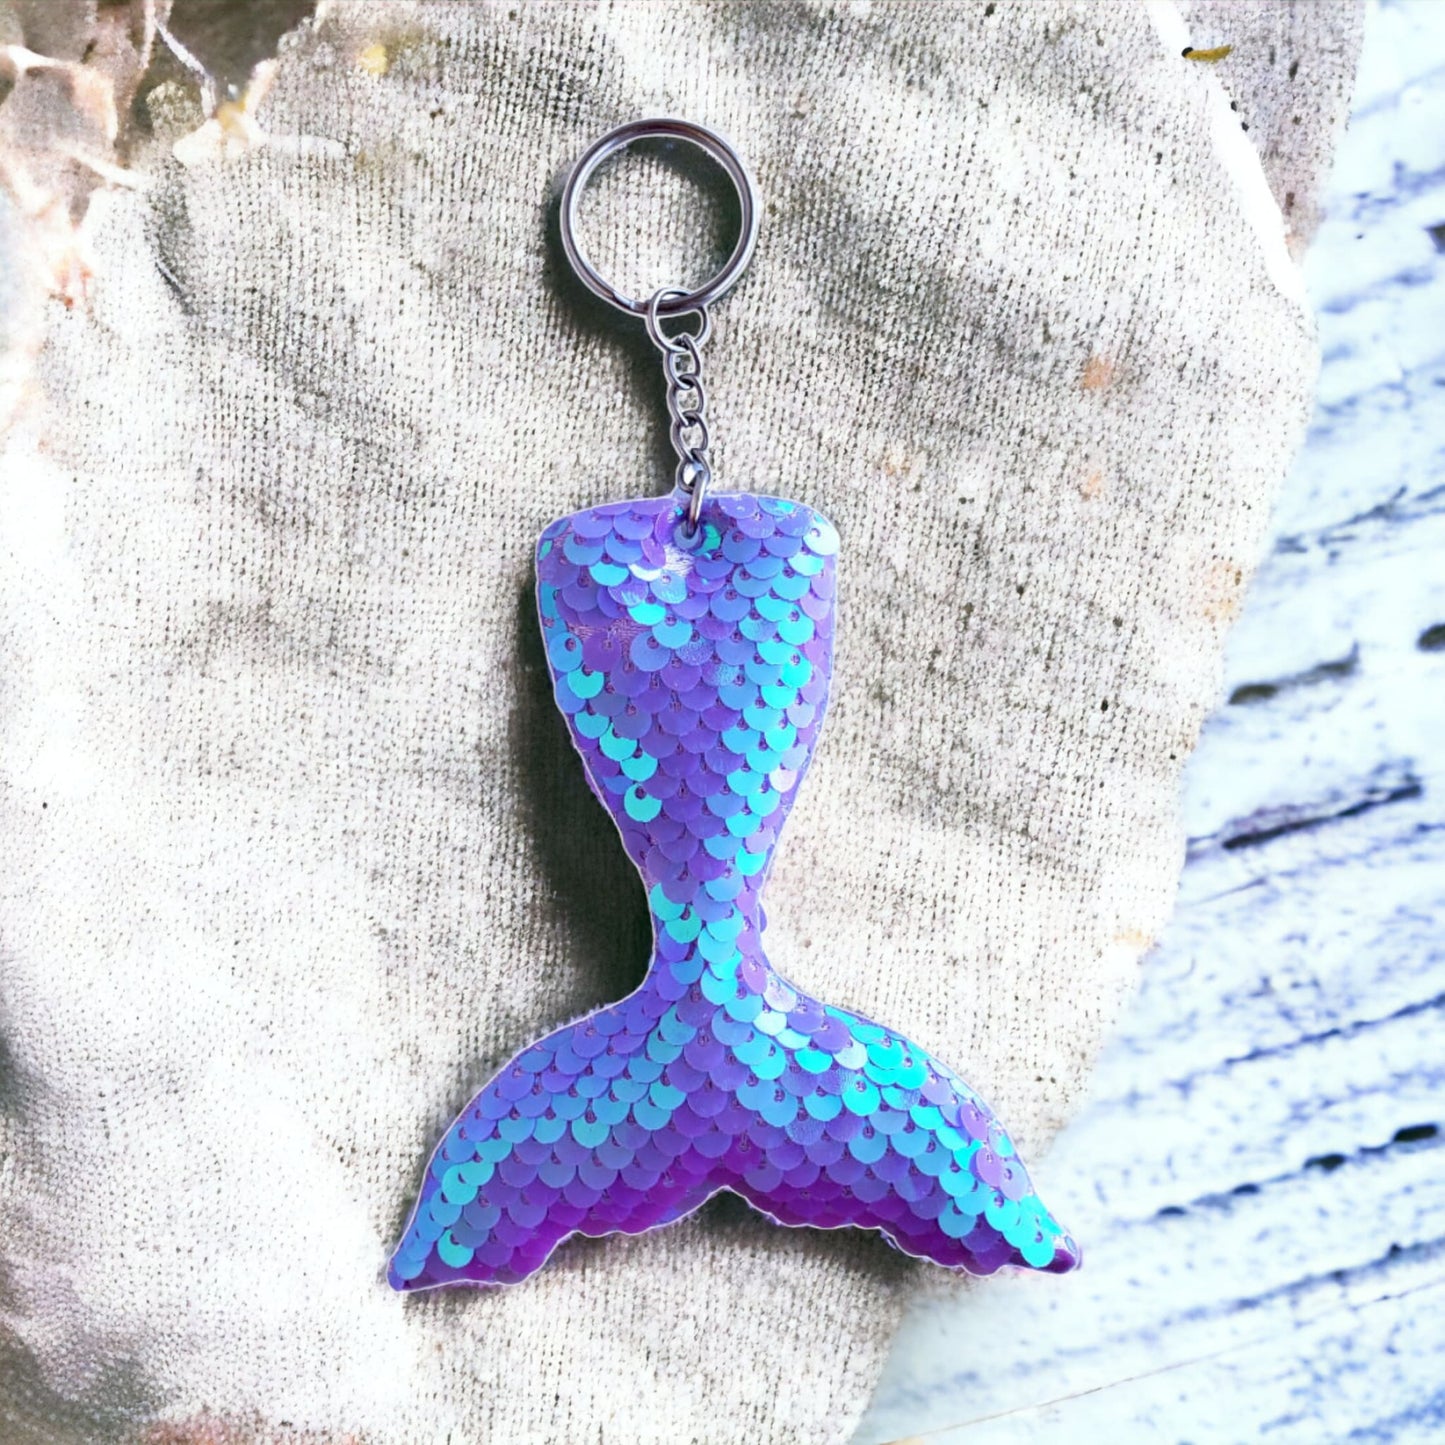 Mermaid Tail Sequin Bag Charm Keychain from Confetti Kitty, Only 2.99